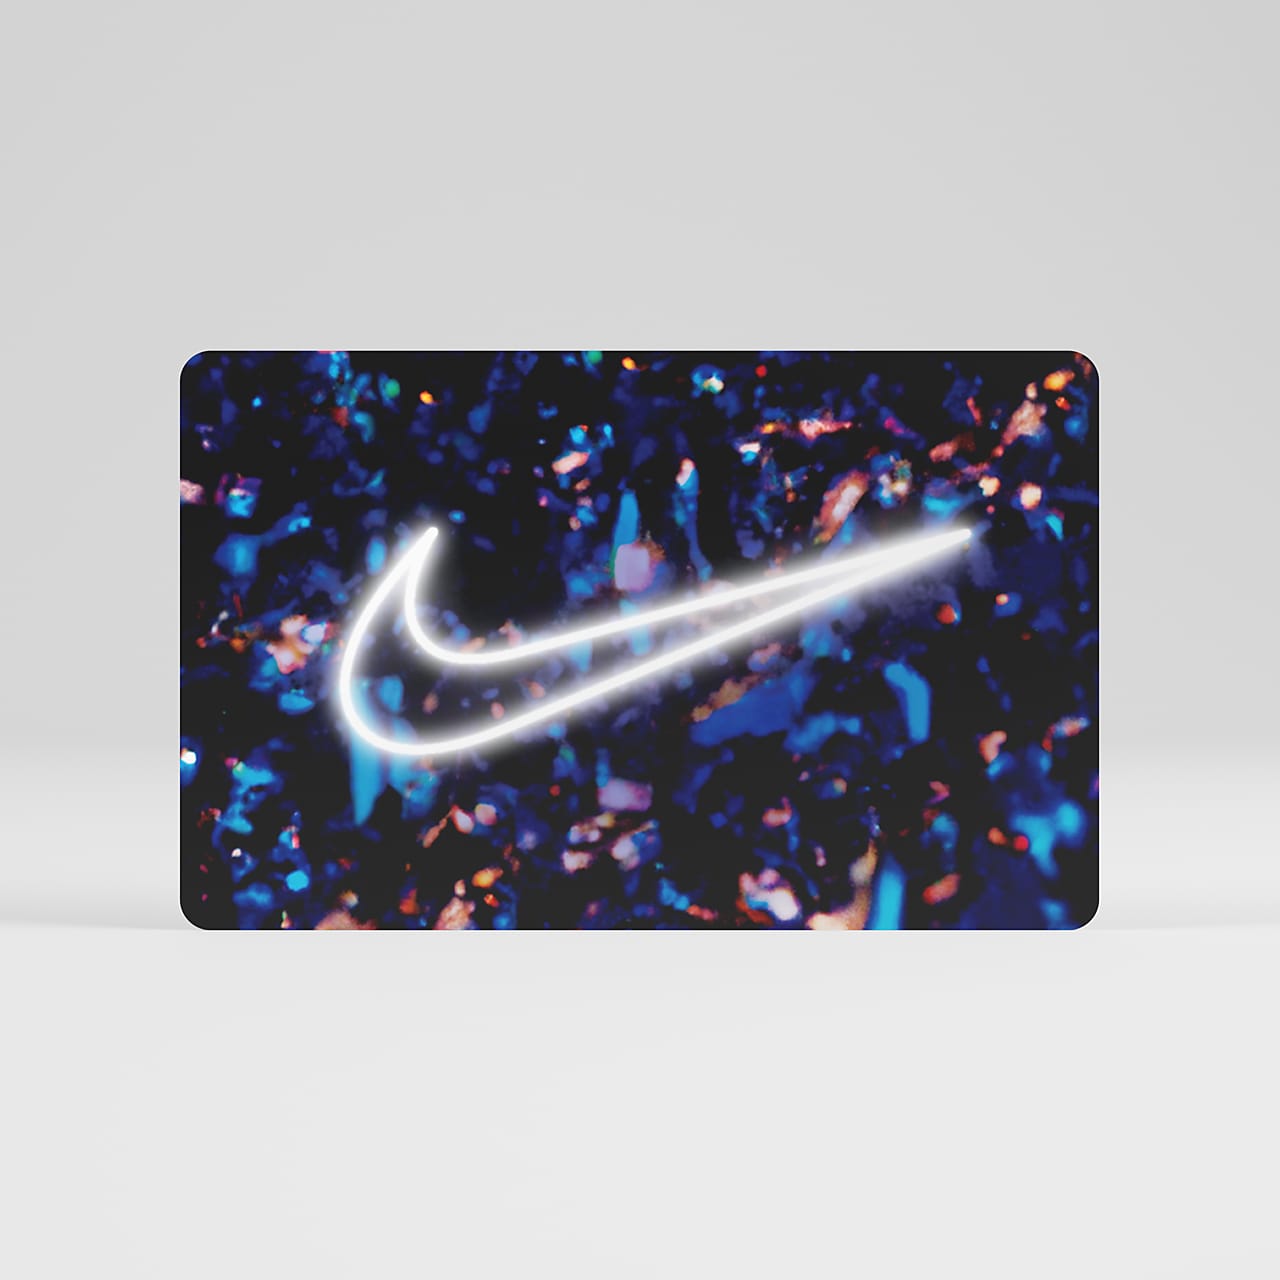 Digital Gift Card Emailed in Approximately 2 Hours or Less. Nike.com